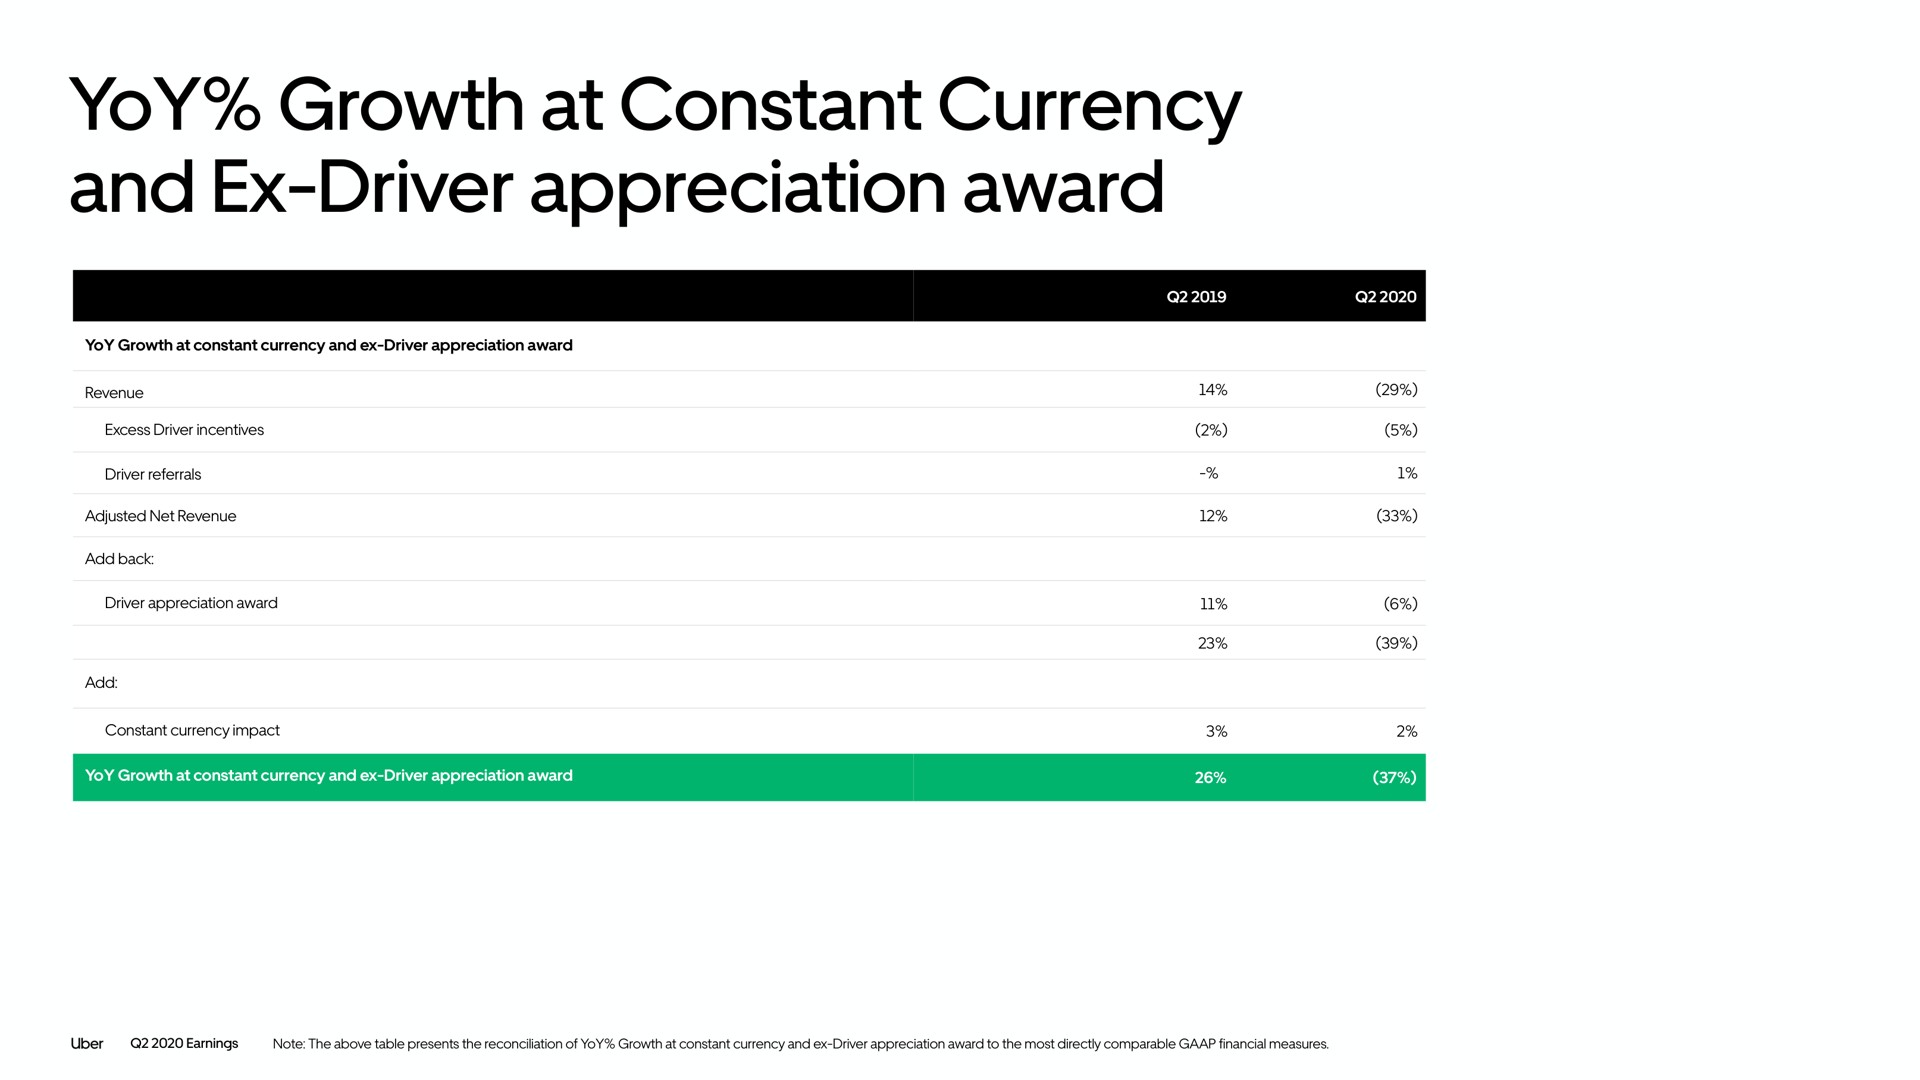 yoy growth at constant currency and driver appreciation award | Uber